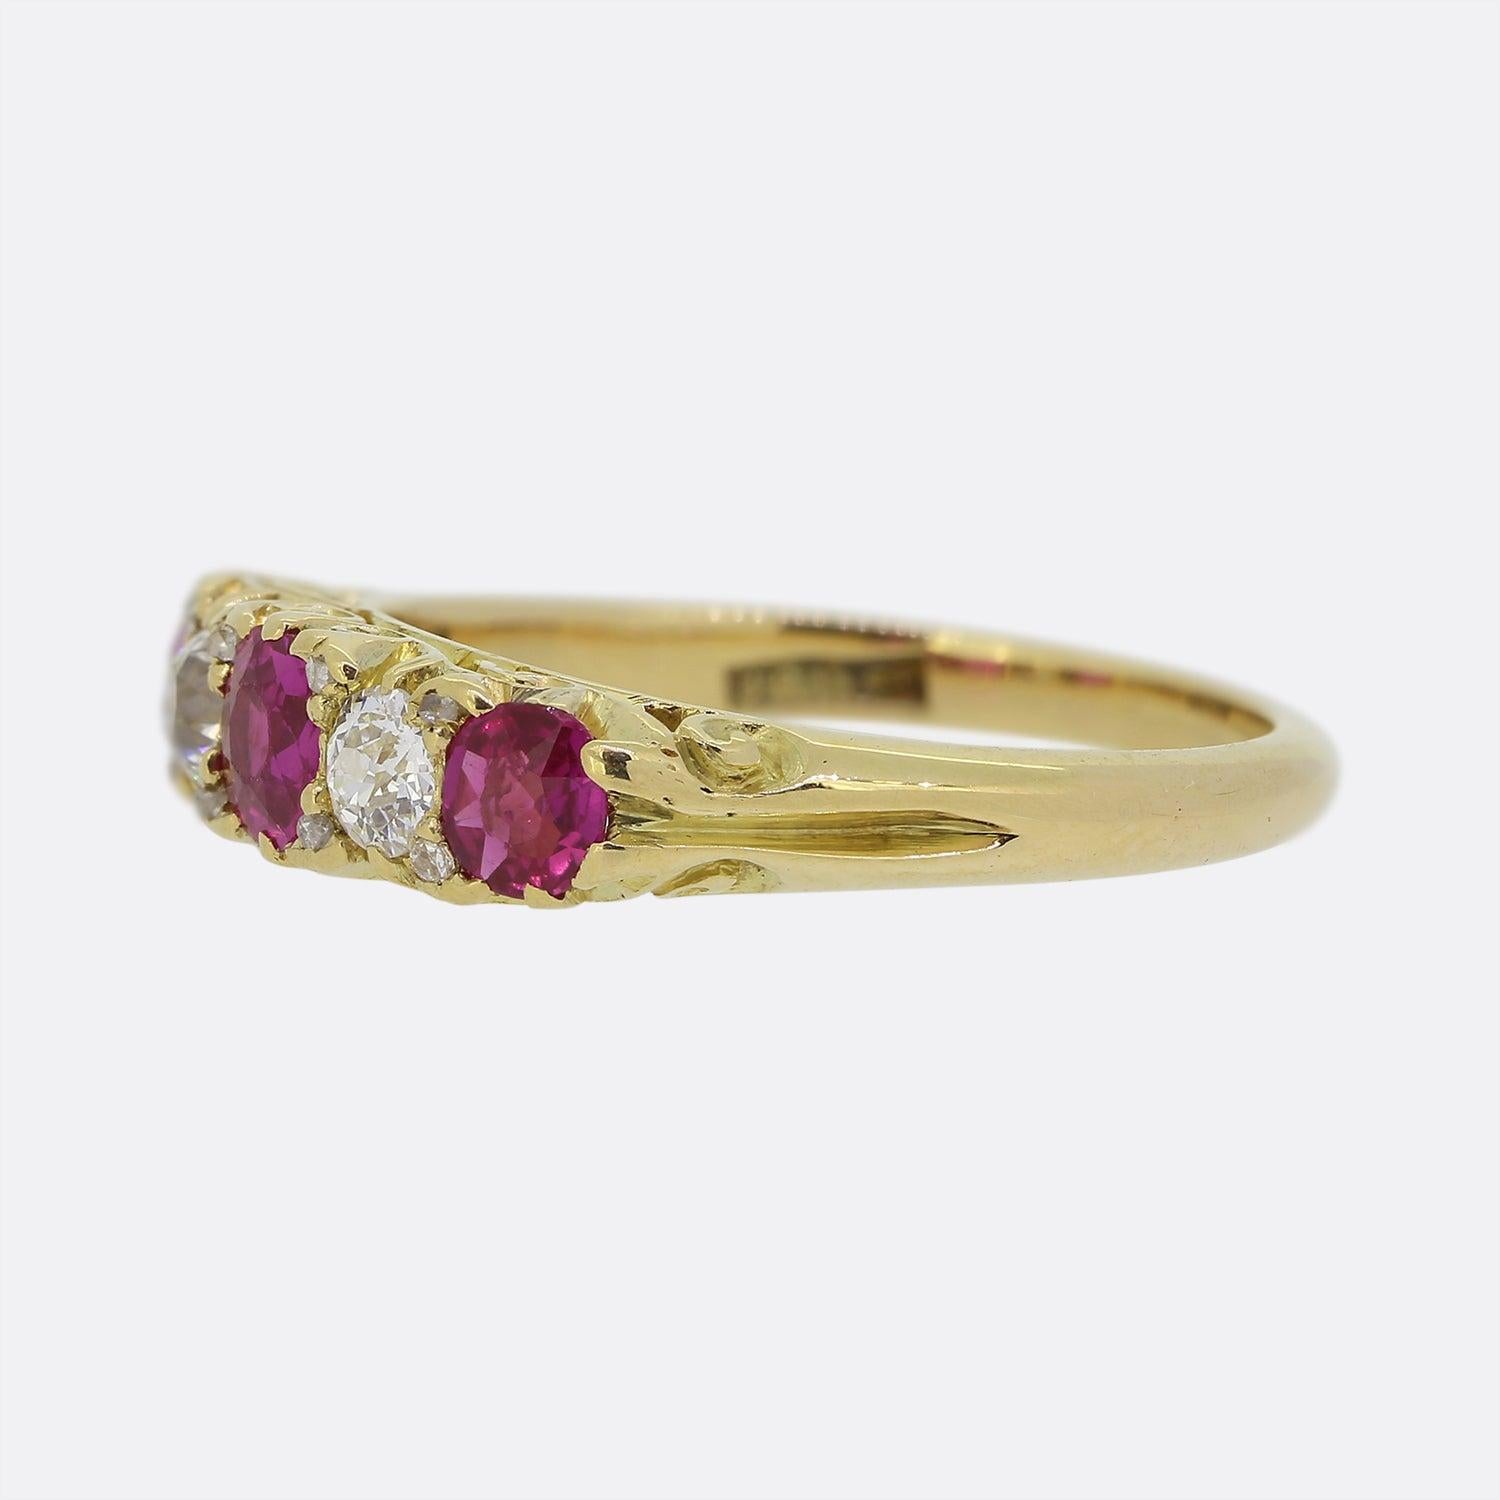 Here we have a 18ct yellow gold Victorian five stone ring. The piece showcases five round faceted gemstones in a single line formation including a trio of pink natural rubies and a duo of old cut diamonds in an alternating sequence. The piece is